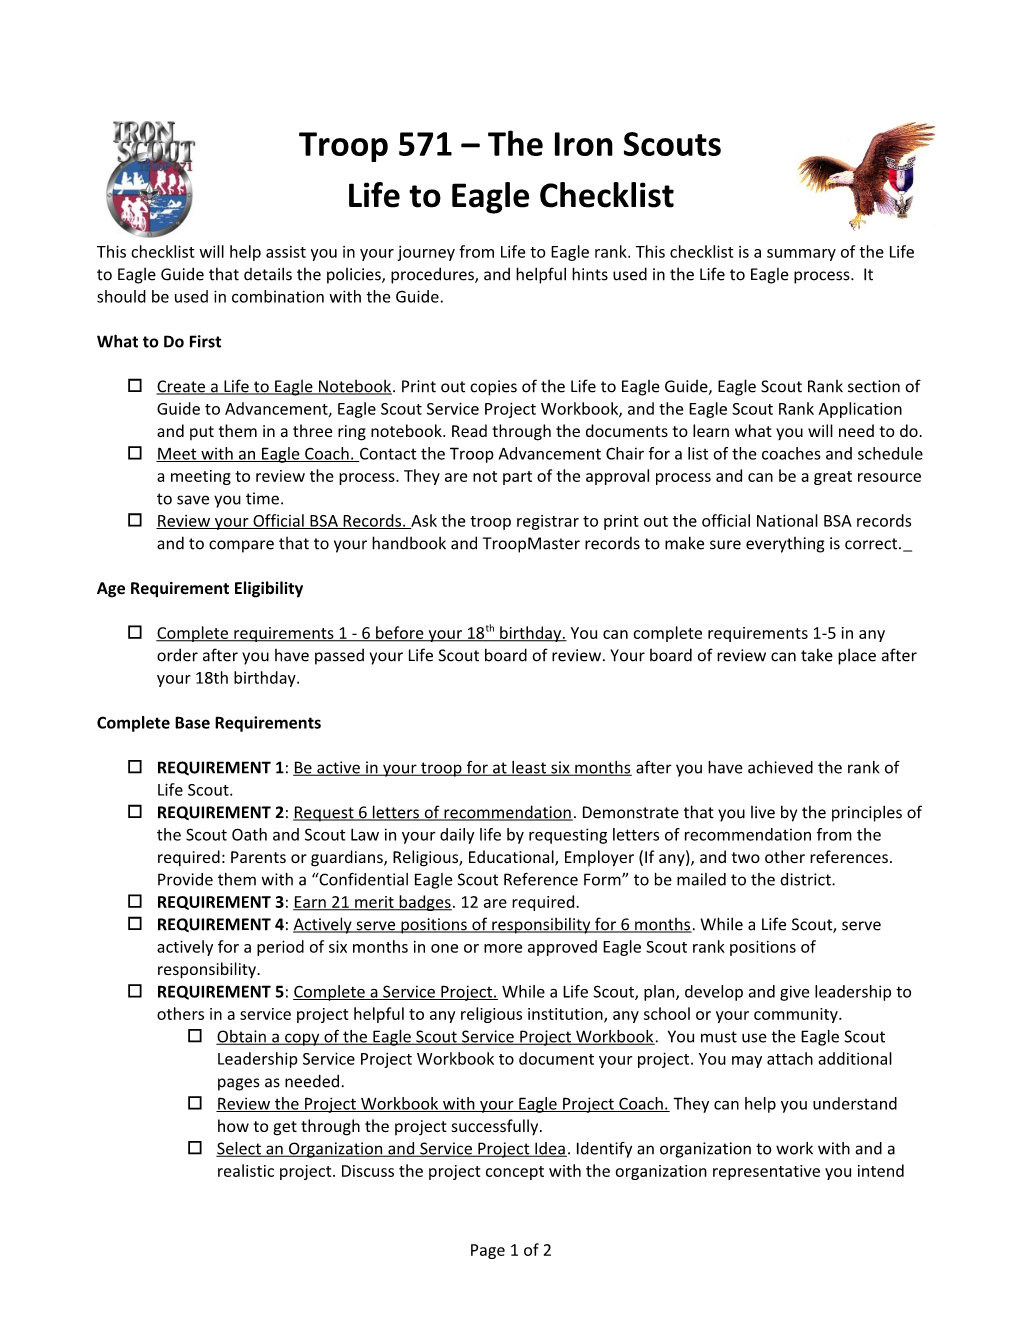 Troop 571 the Iron Scouts Life to Eagle Checklist